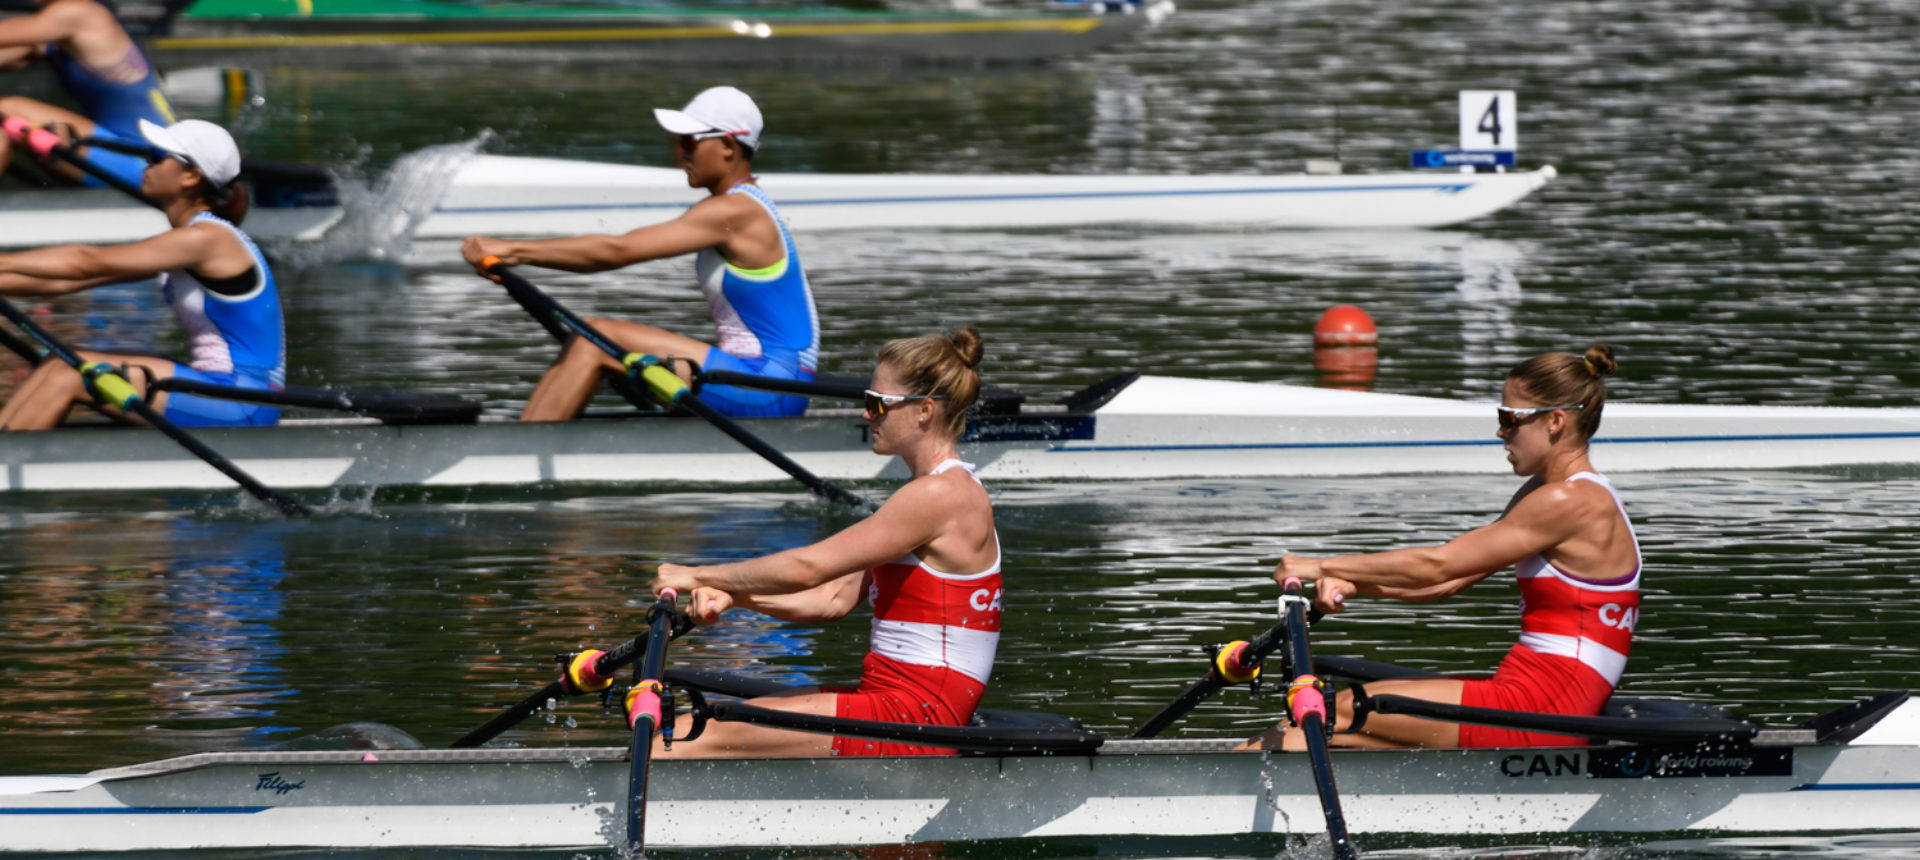 Strong opening day for Canada at Rowing World Championships